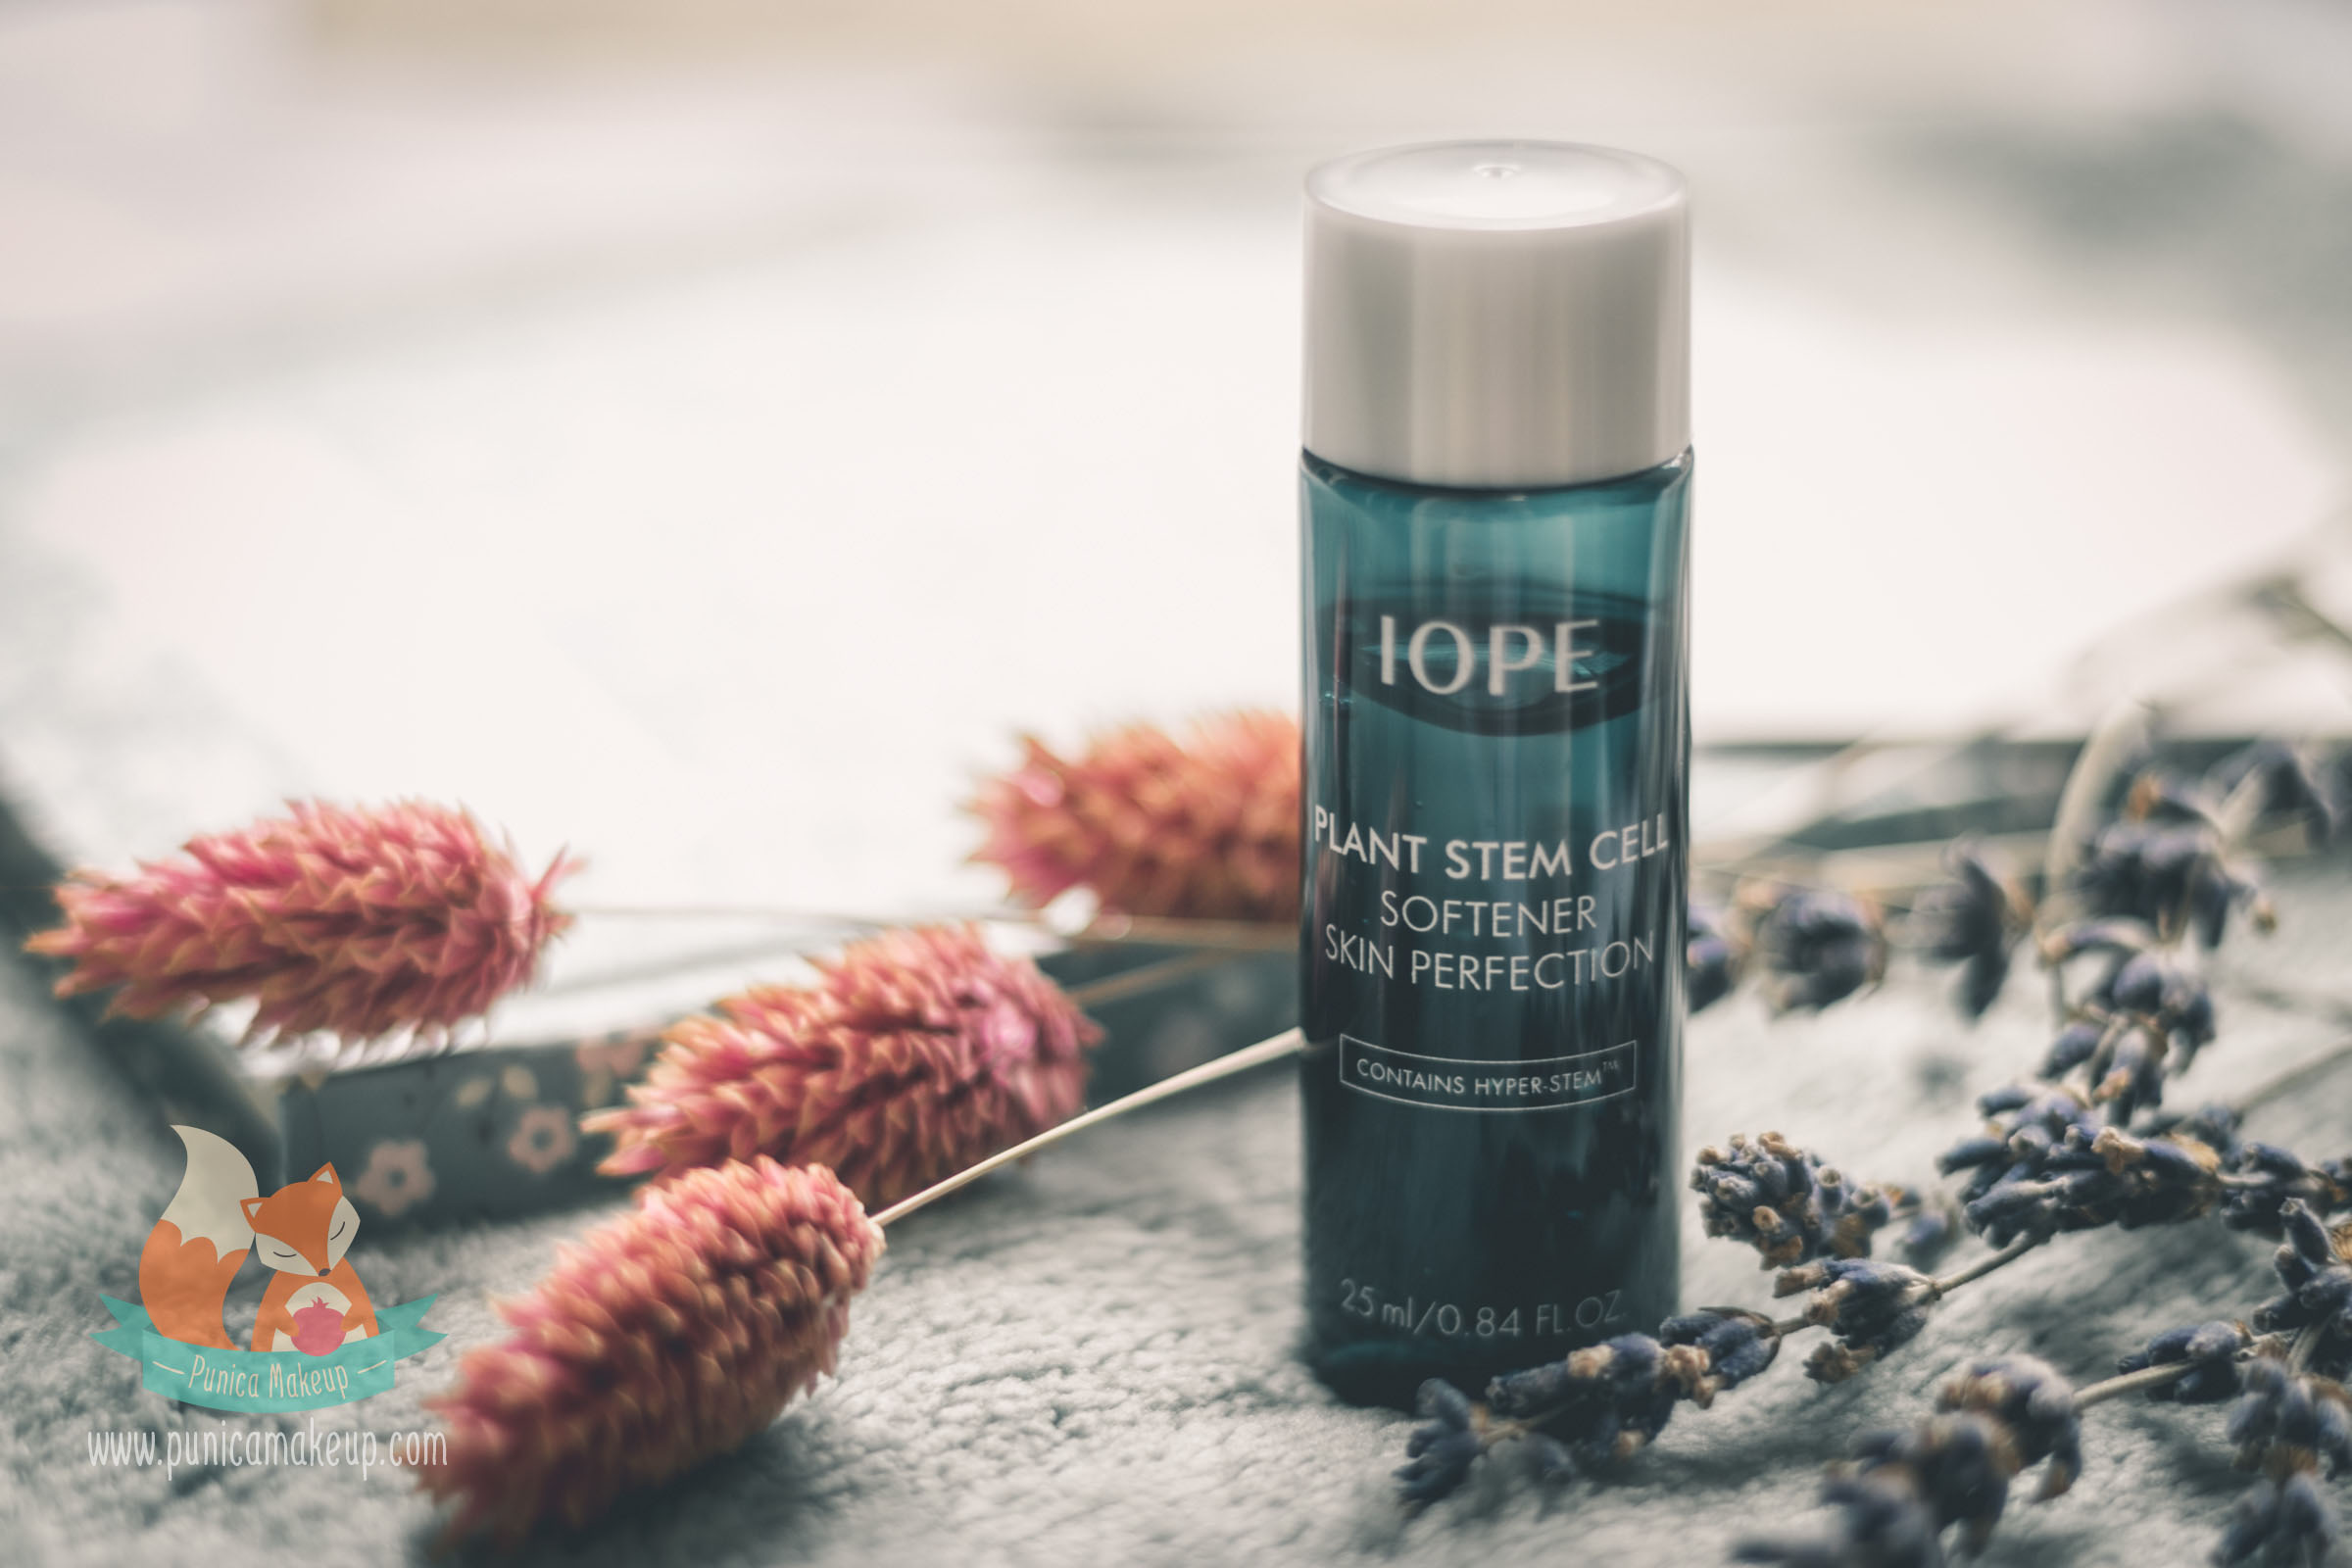 Review: IOPE – Plant Stem Cell Softener Skin Perfection